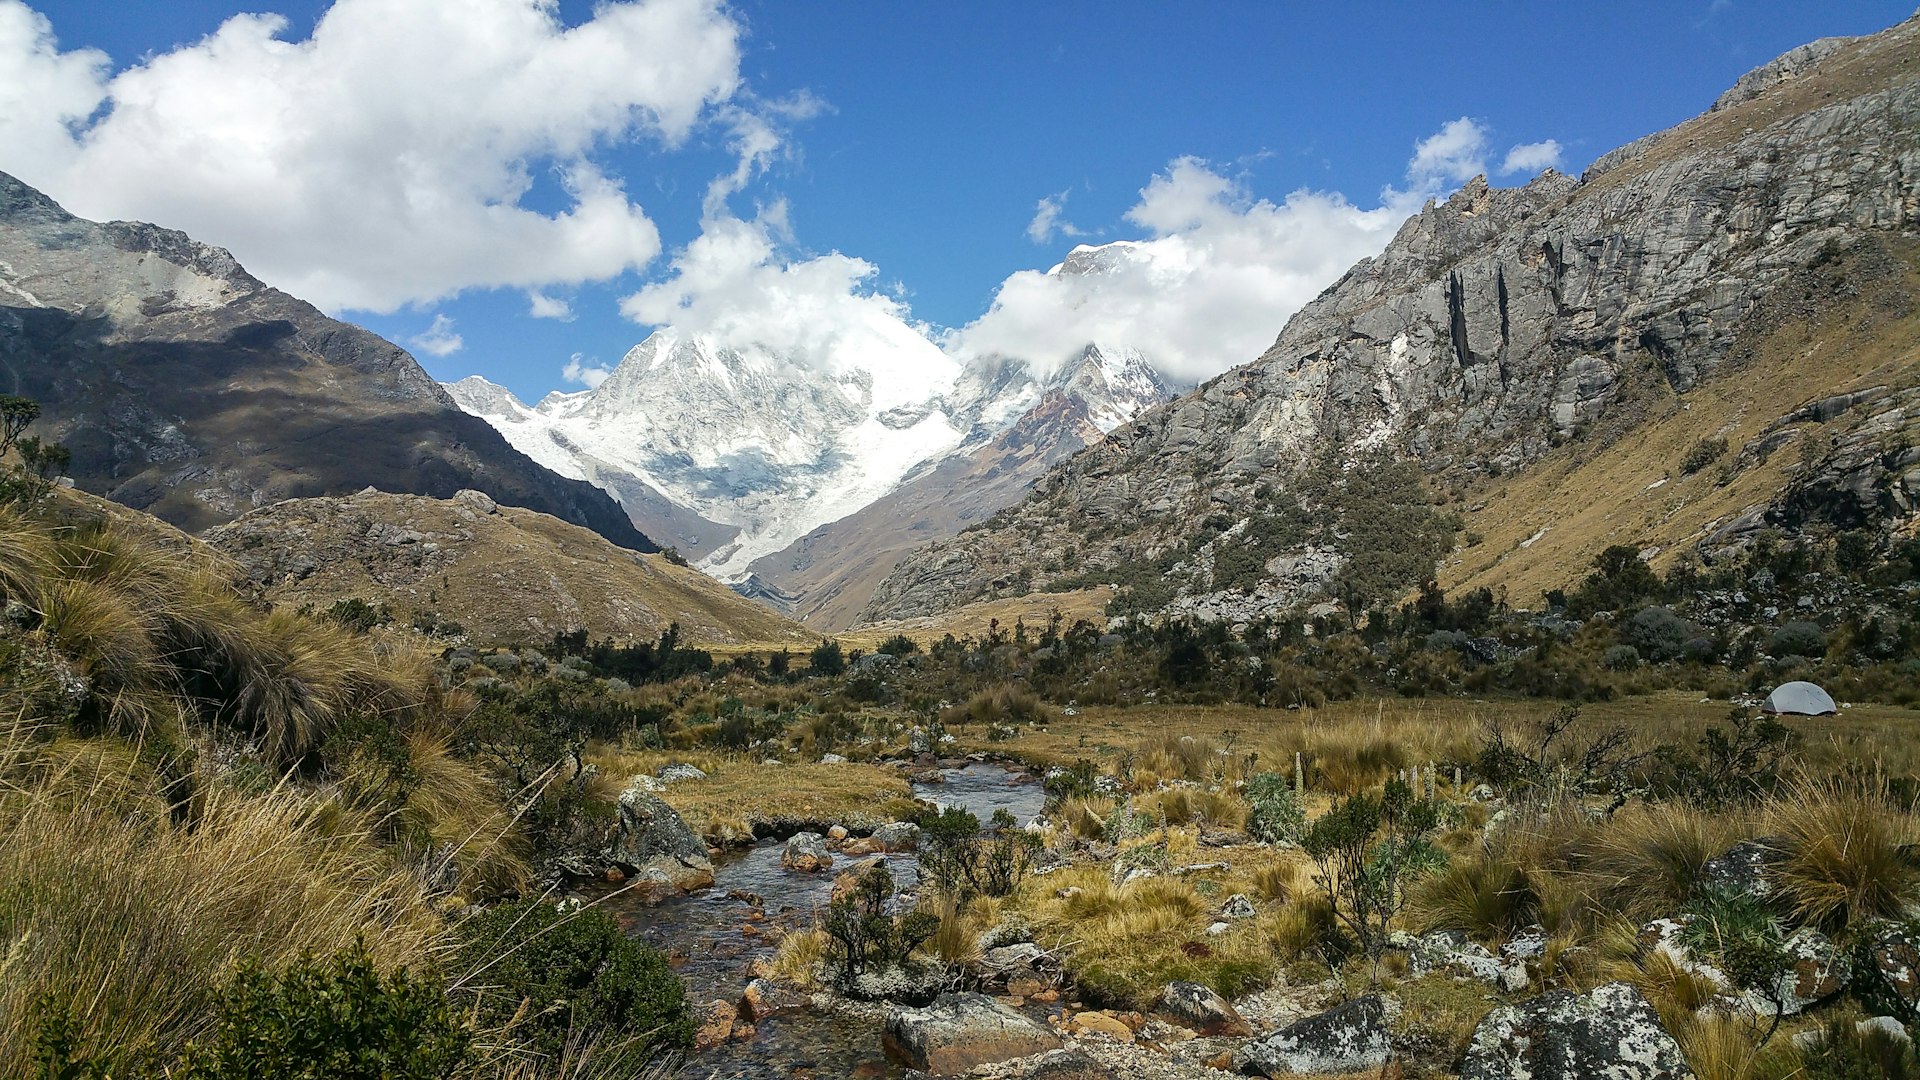 A mountain valley in Huascarán National Park covered in golden grasses with a stream running through it and large mountain peaks in the background.